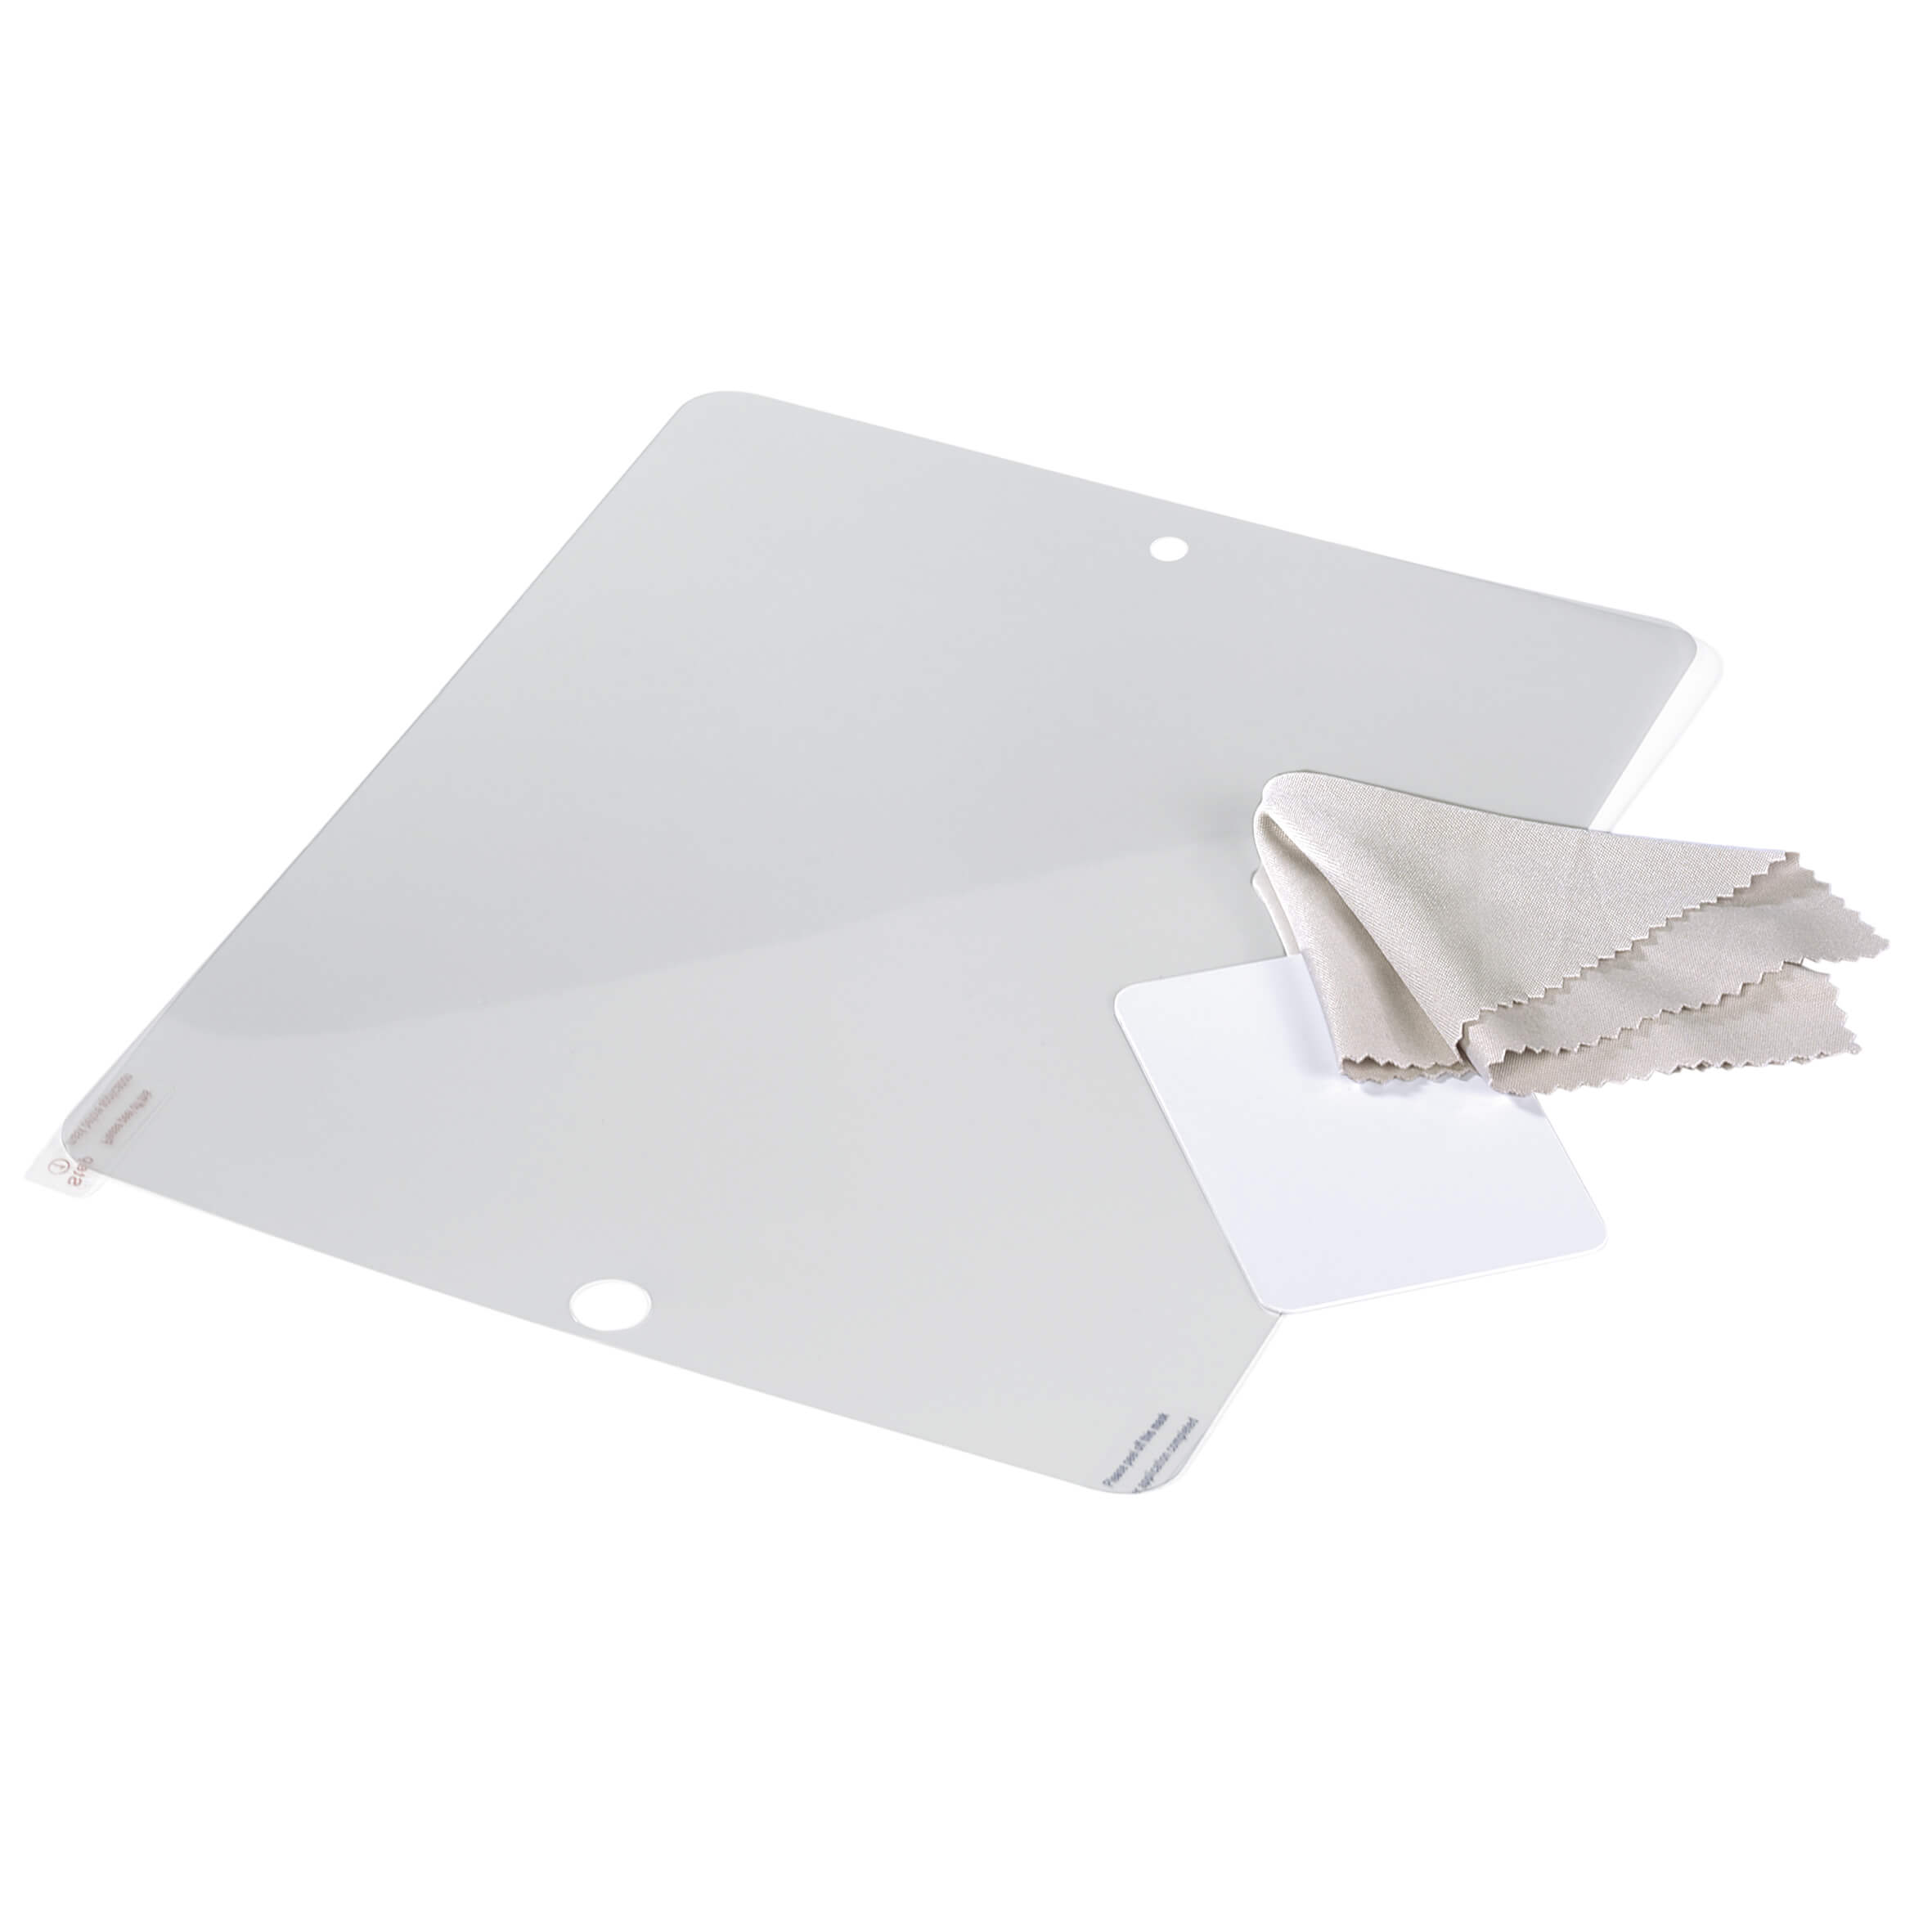 Mirror Screen Protector for A pple iPad 2/3rd Generation